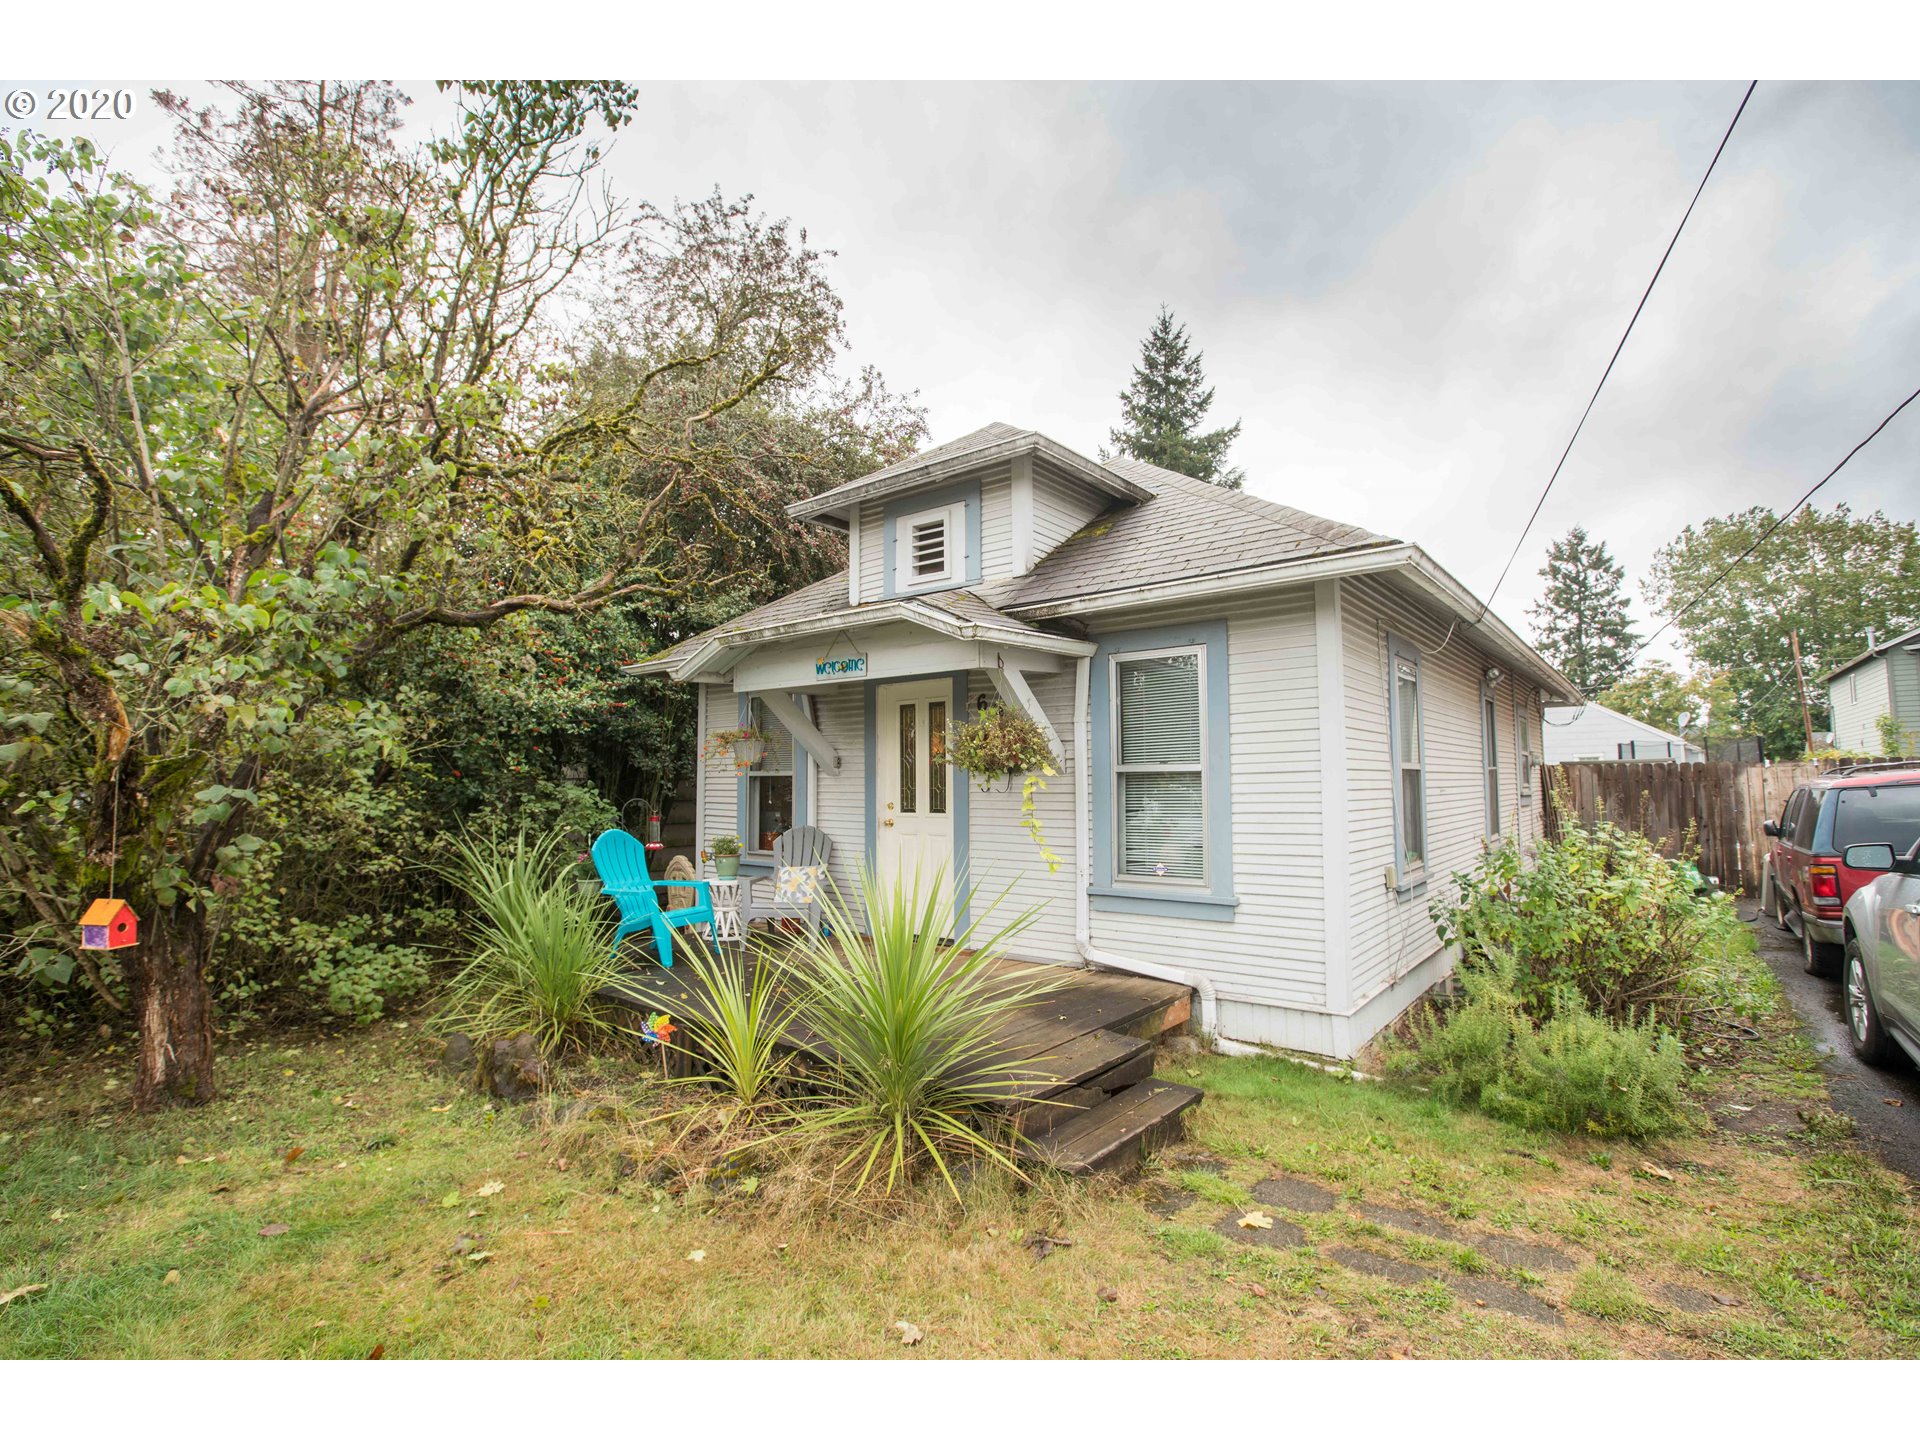 6915 SE 66TH AVE (1 of 13)